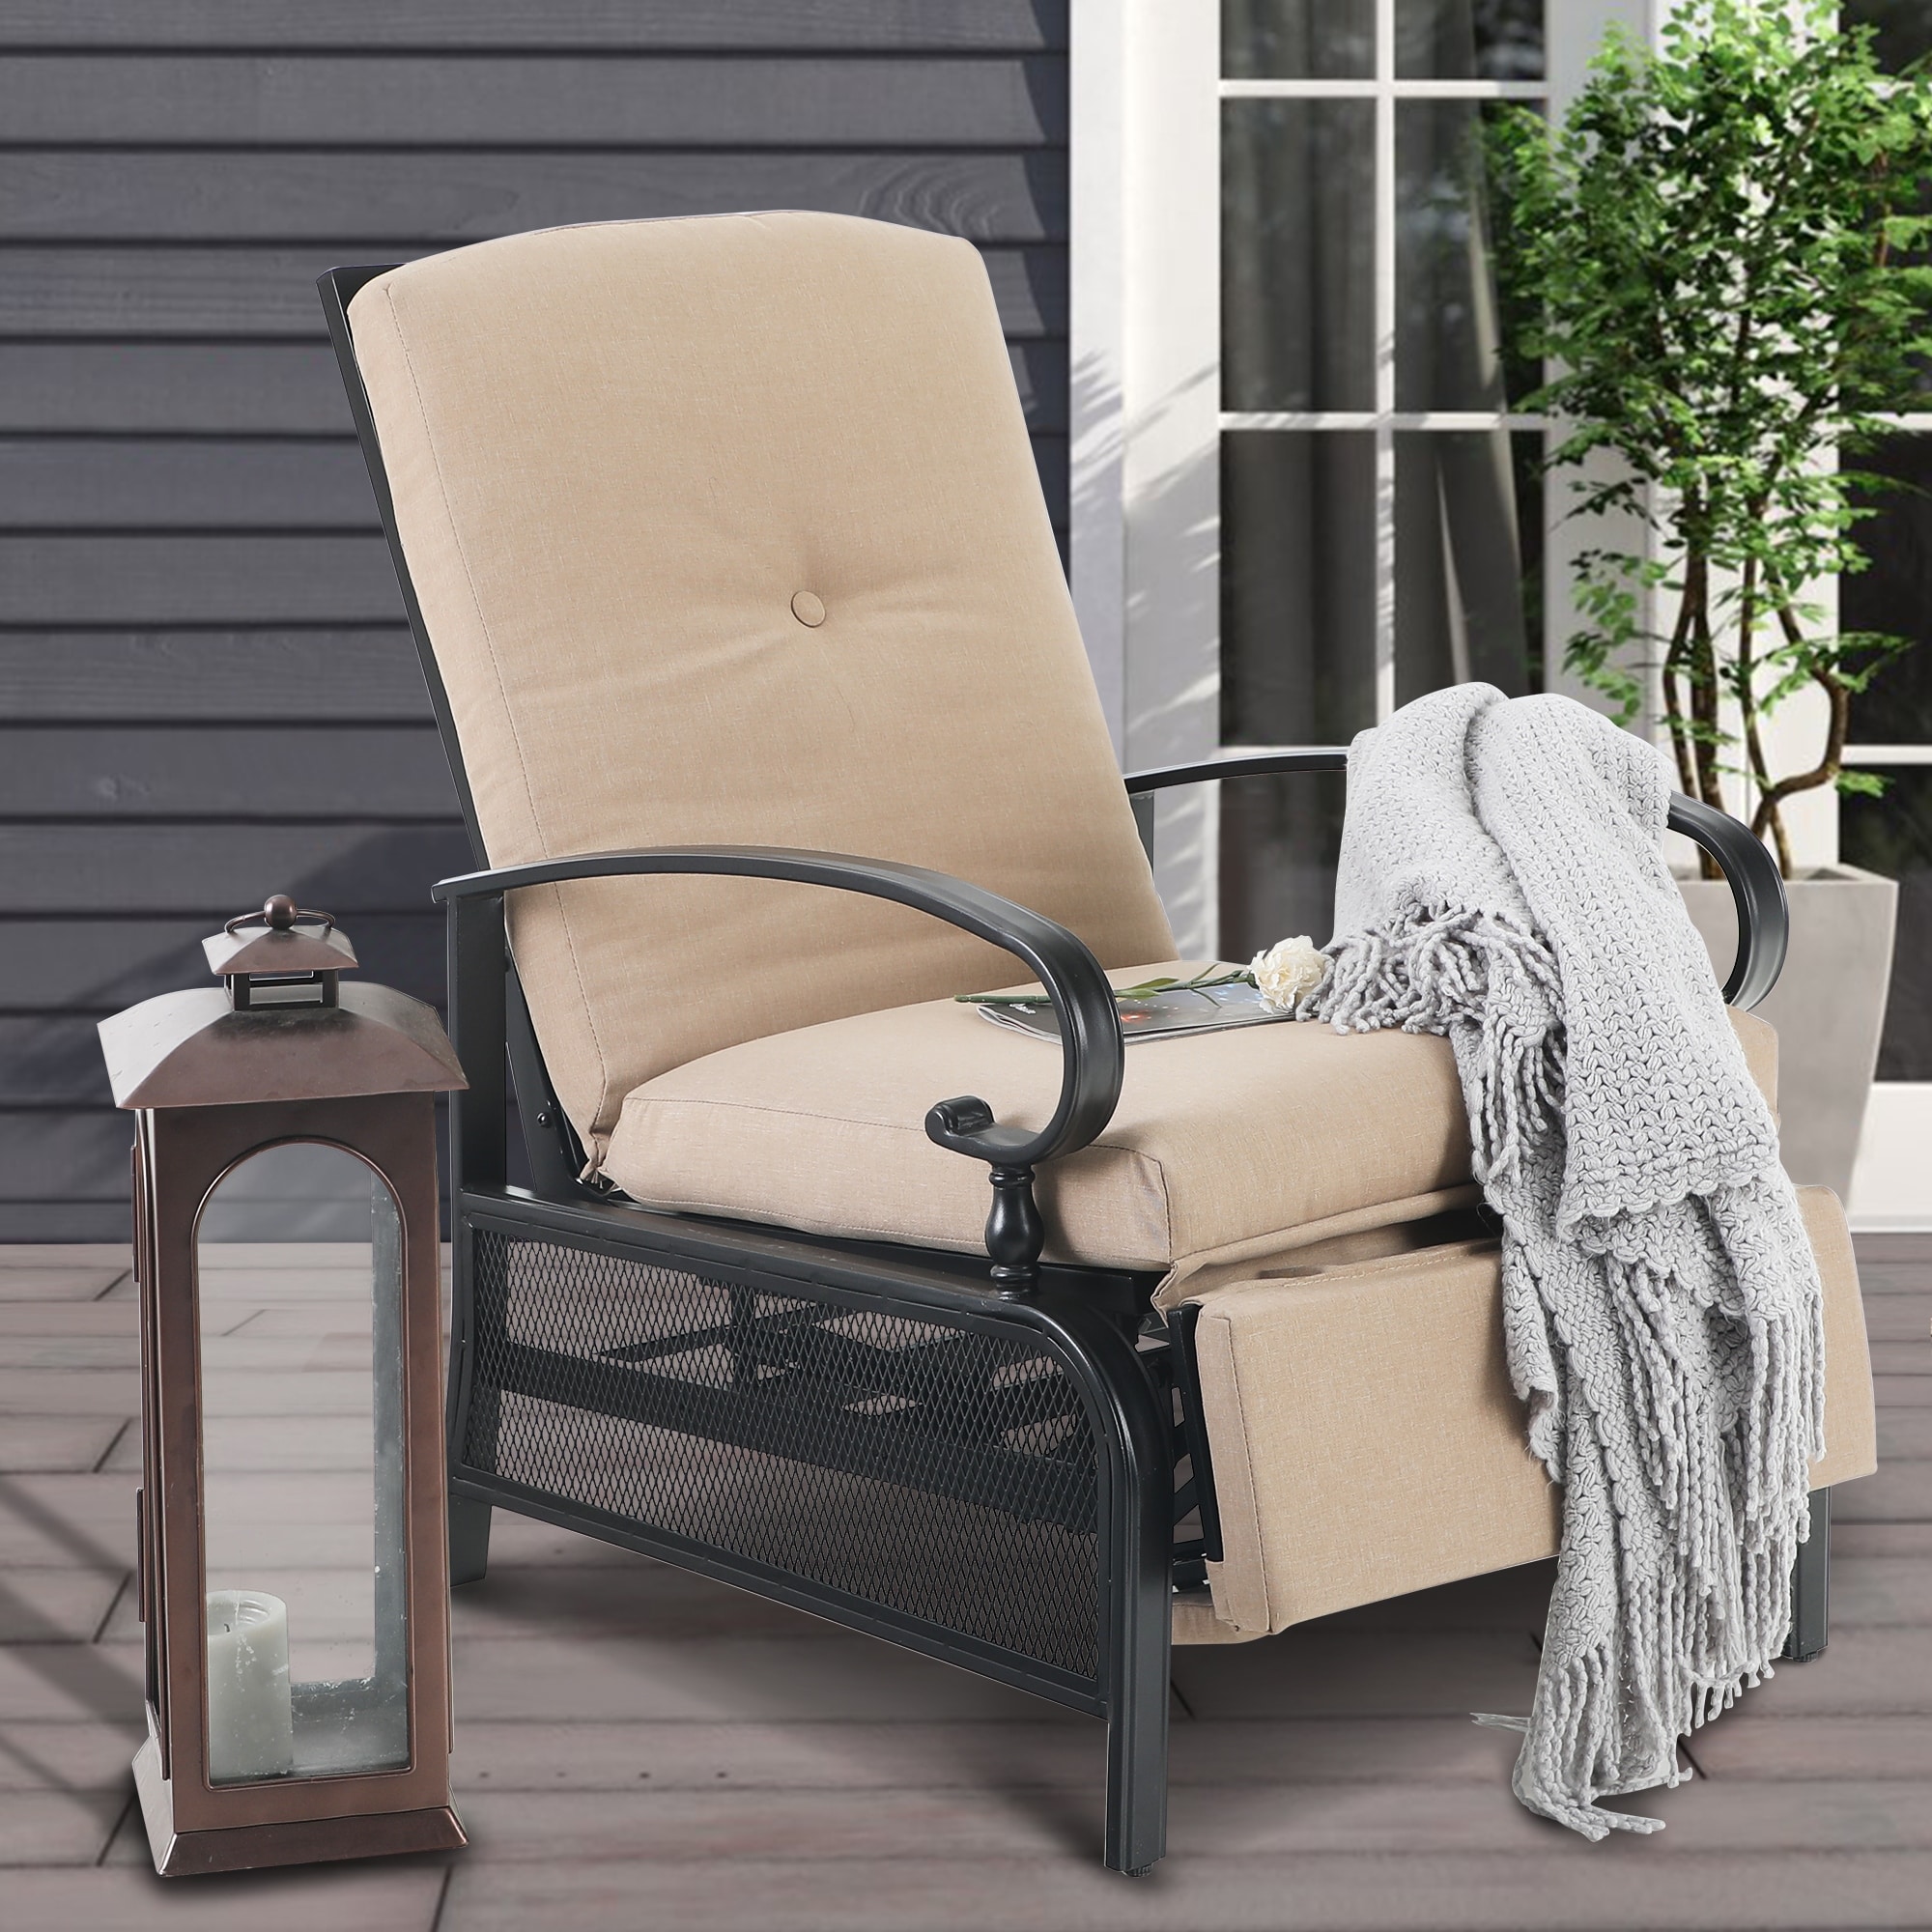 Outdoor Adjustable Cushioned Metal Patio Recliner Lounge Chair - Beige